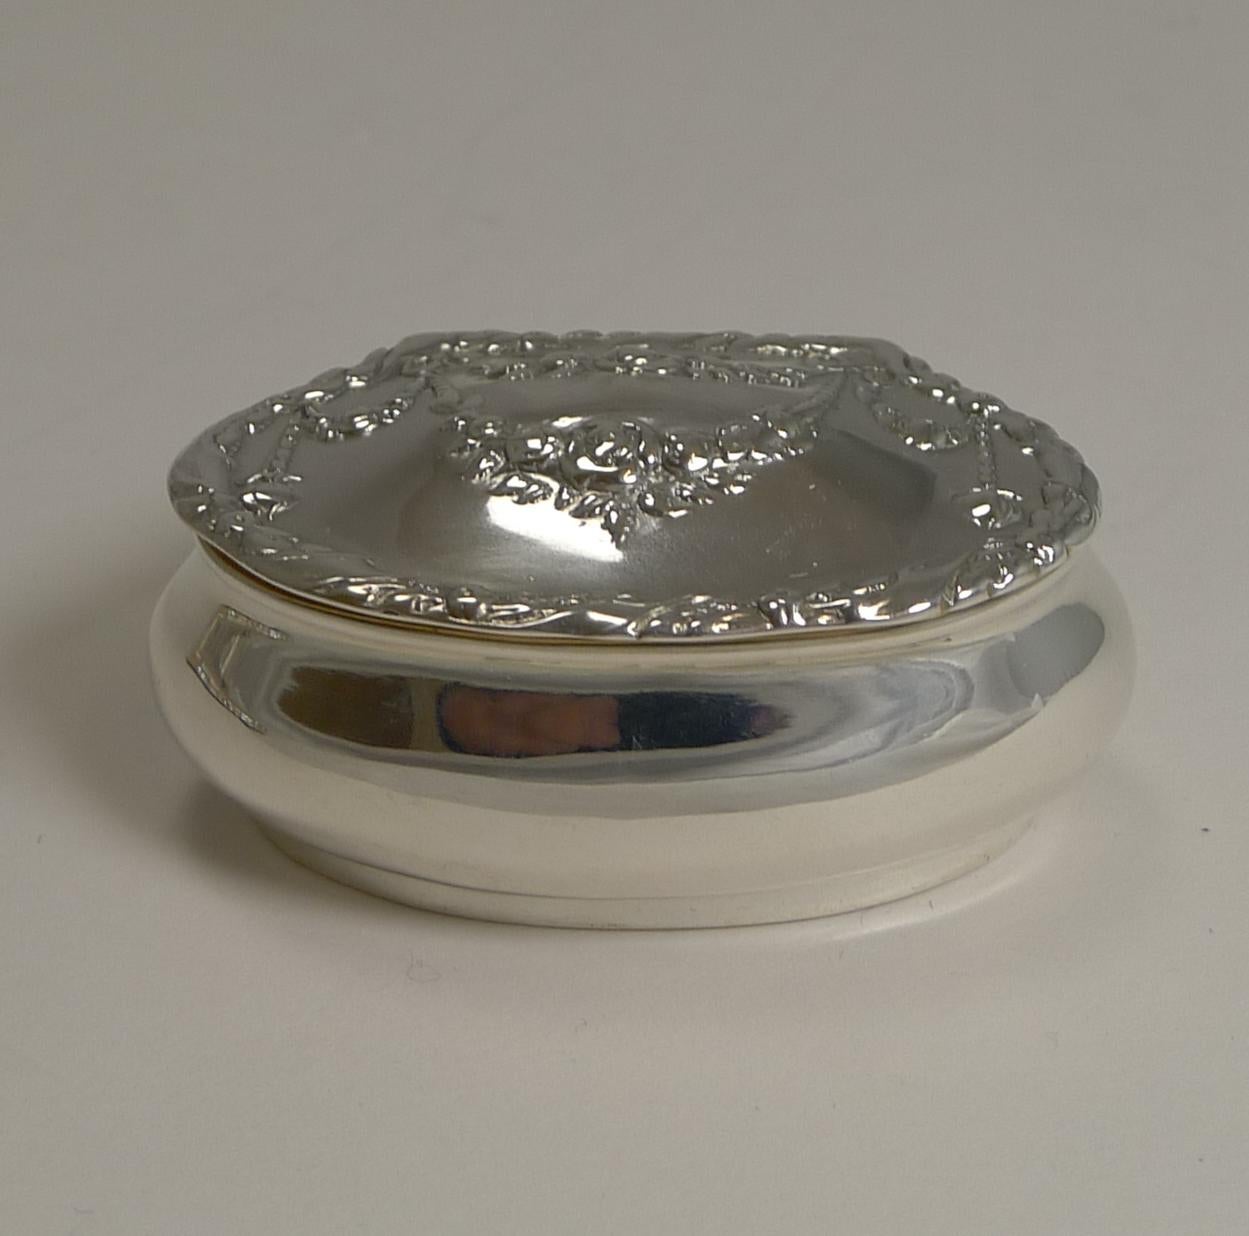 Pretty as a picture, this delightful sterling silver pill box with it's elegant shape and domed lid is adorned with a pretty floral garland decoration.

The lid fits well and once opened, reveals a lavishly gilded interior.

There is a full